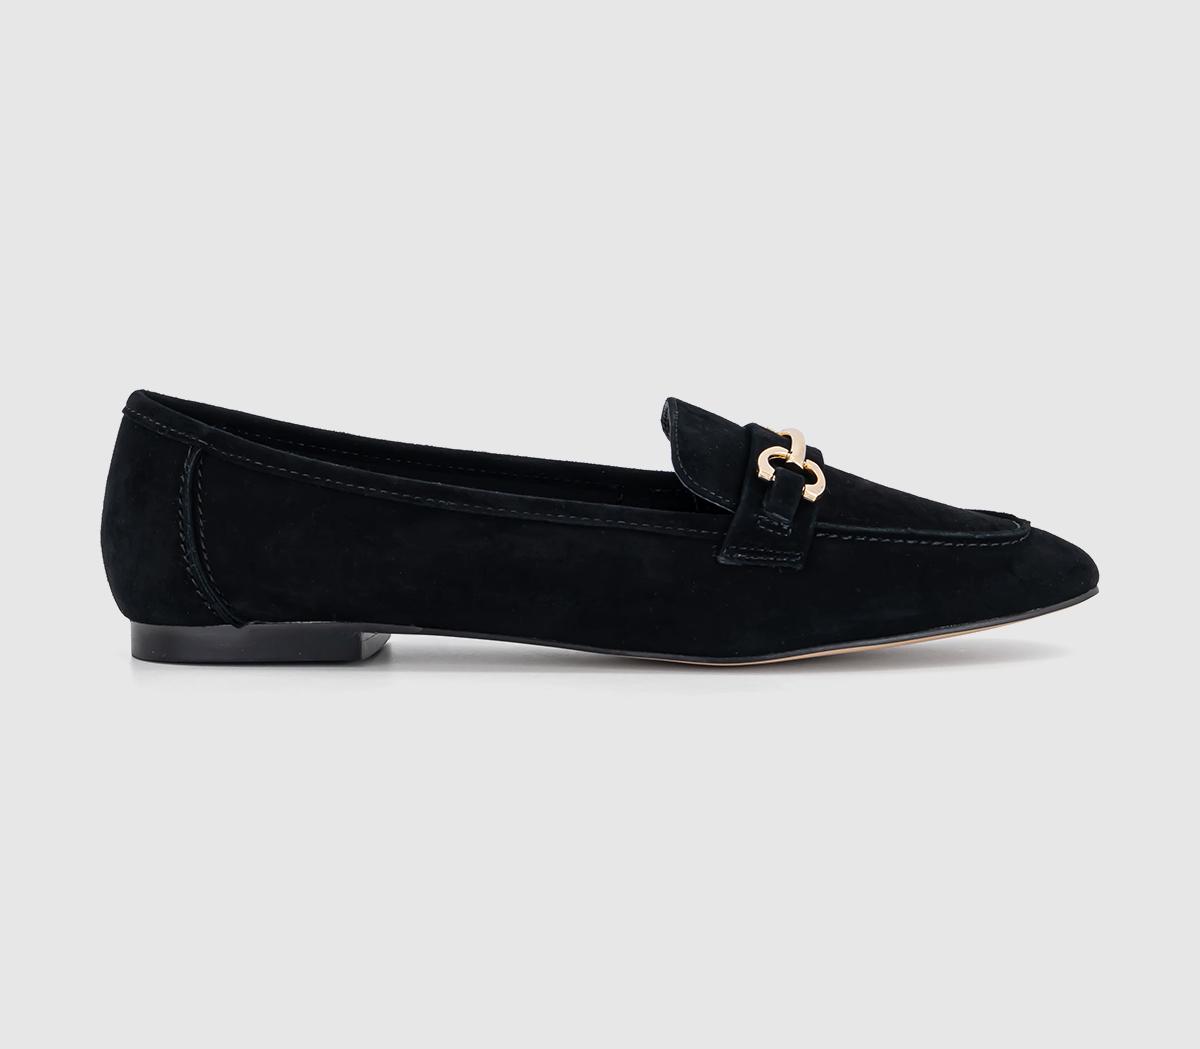 OFFICE Finnegan Short Vamp Loafers Black Suede - Flat Shoes for Women